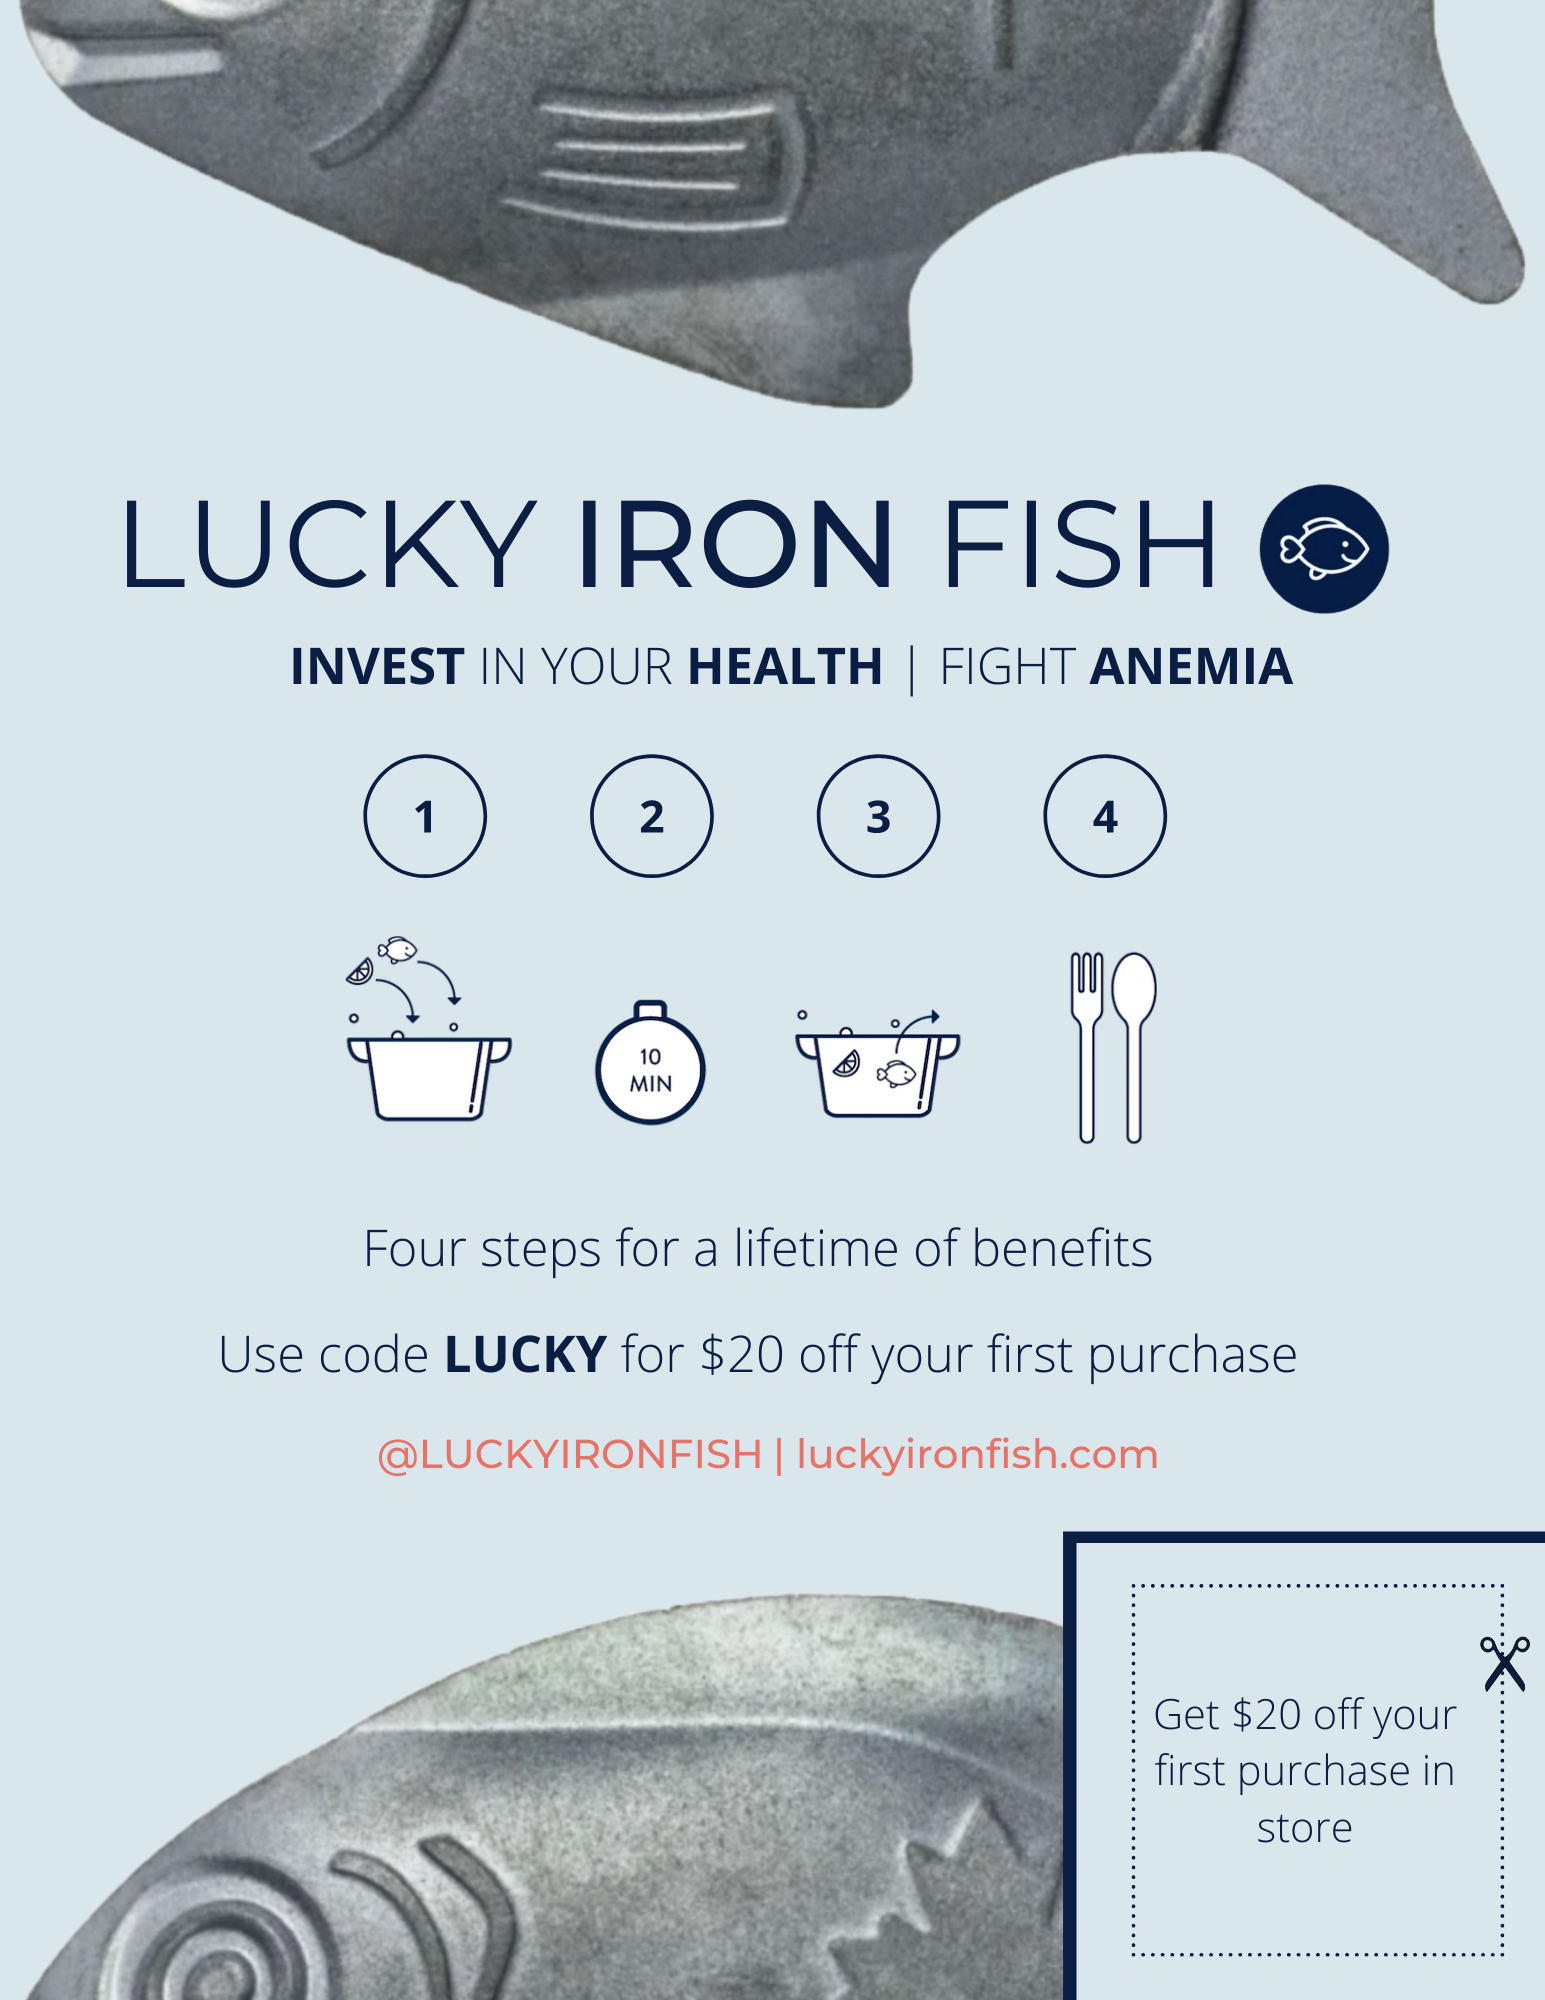 A poster advertising the lukcy iron fish product.